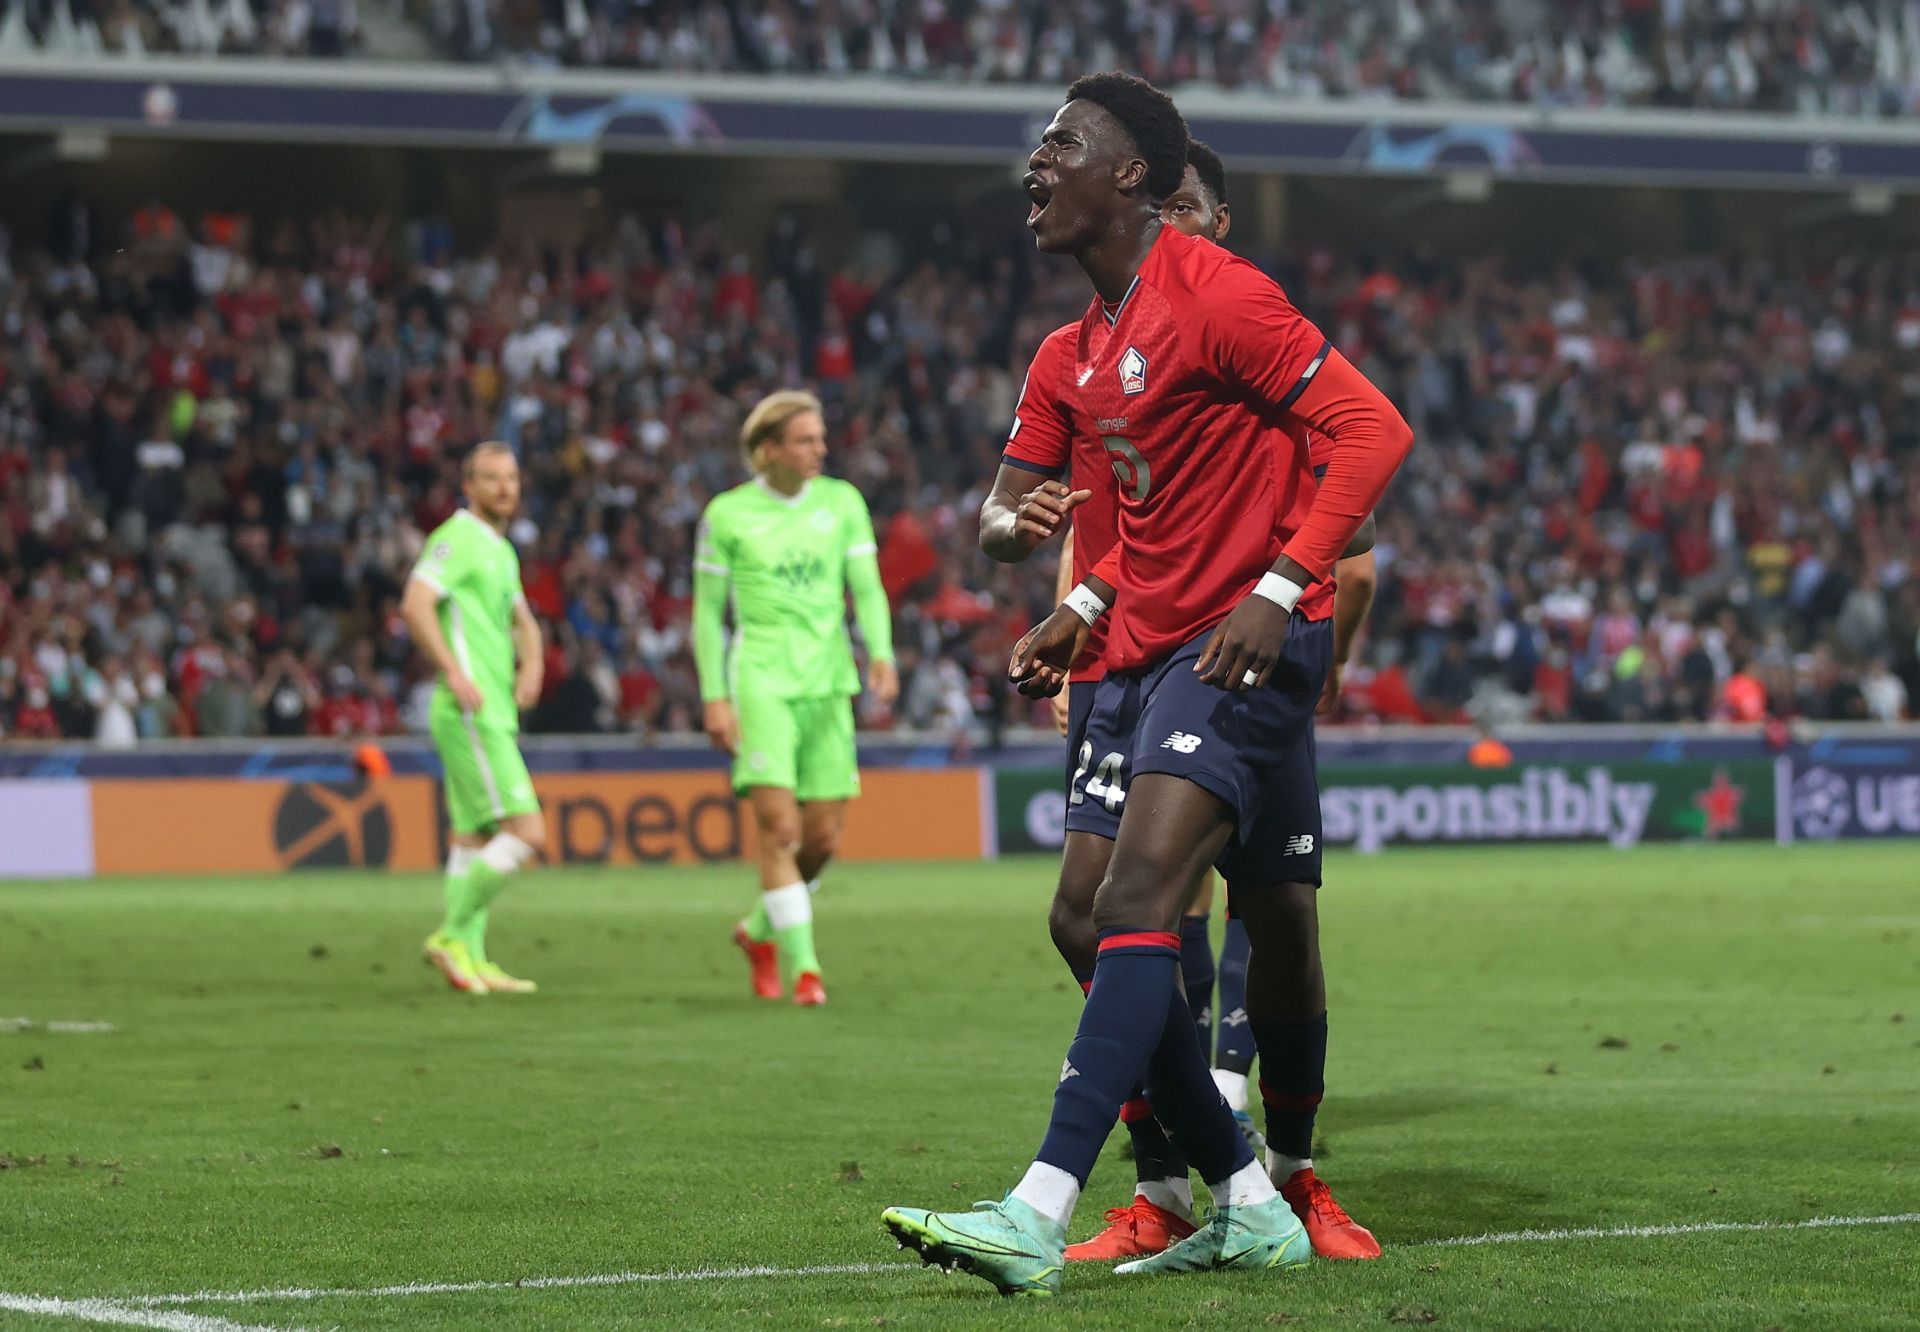 Amadou Onana was fantastic for LOSC Lille and has been signed by Everton.